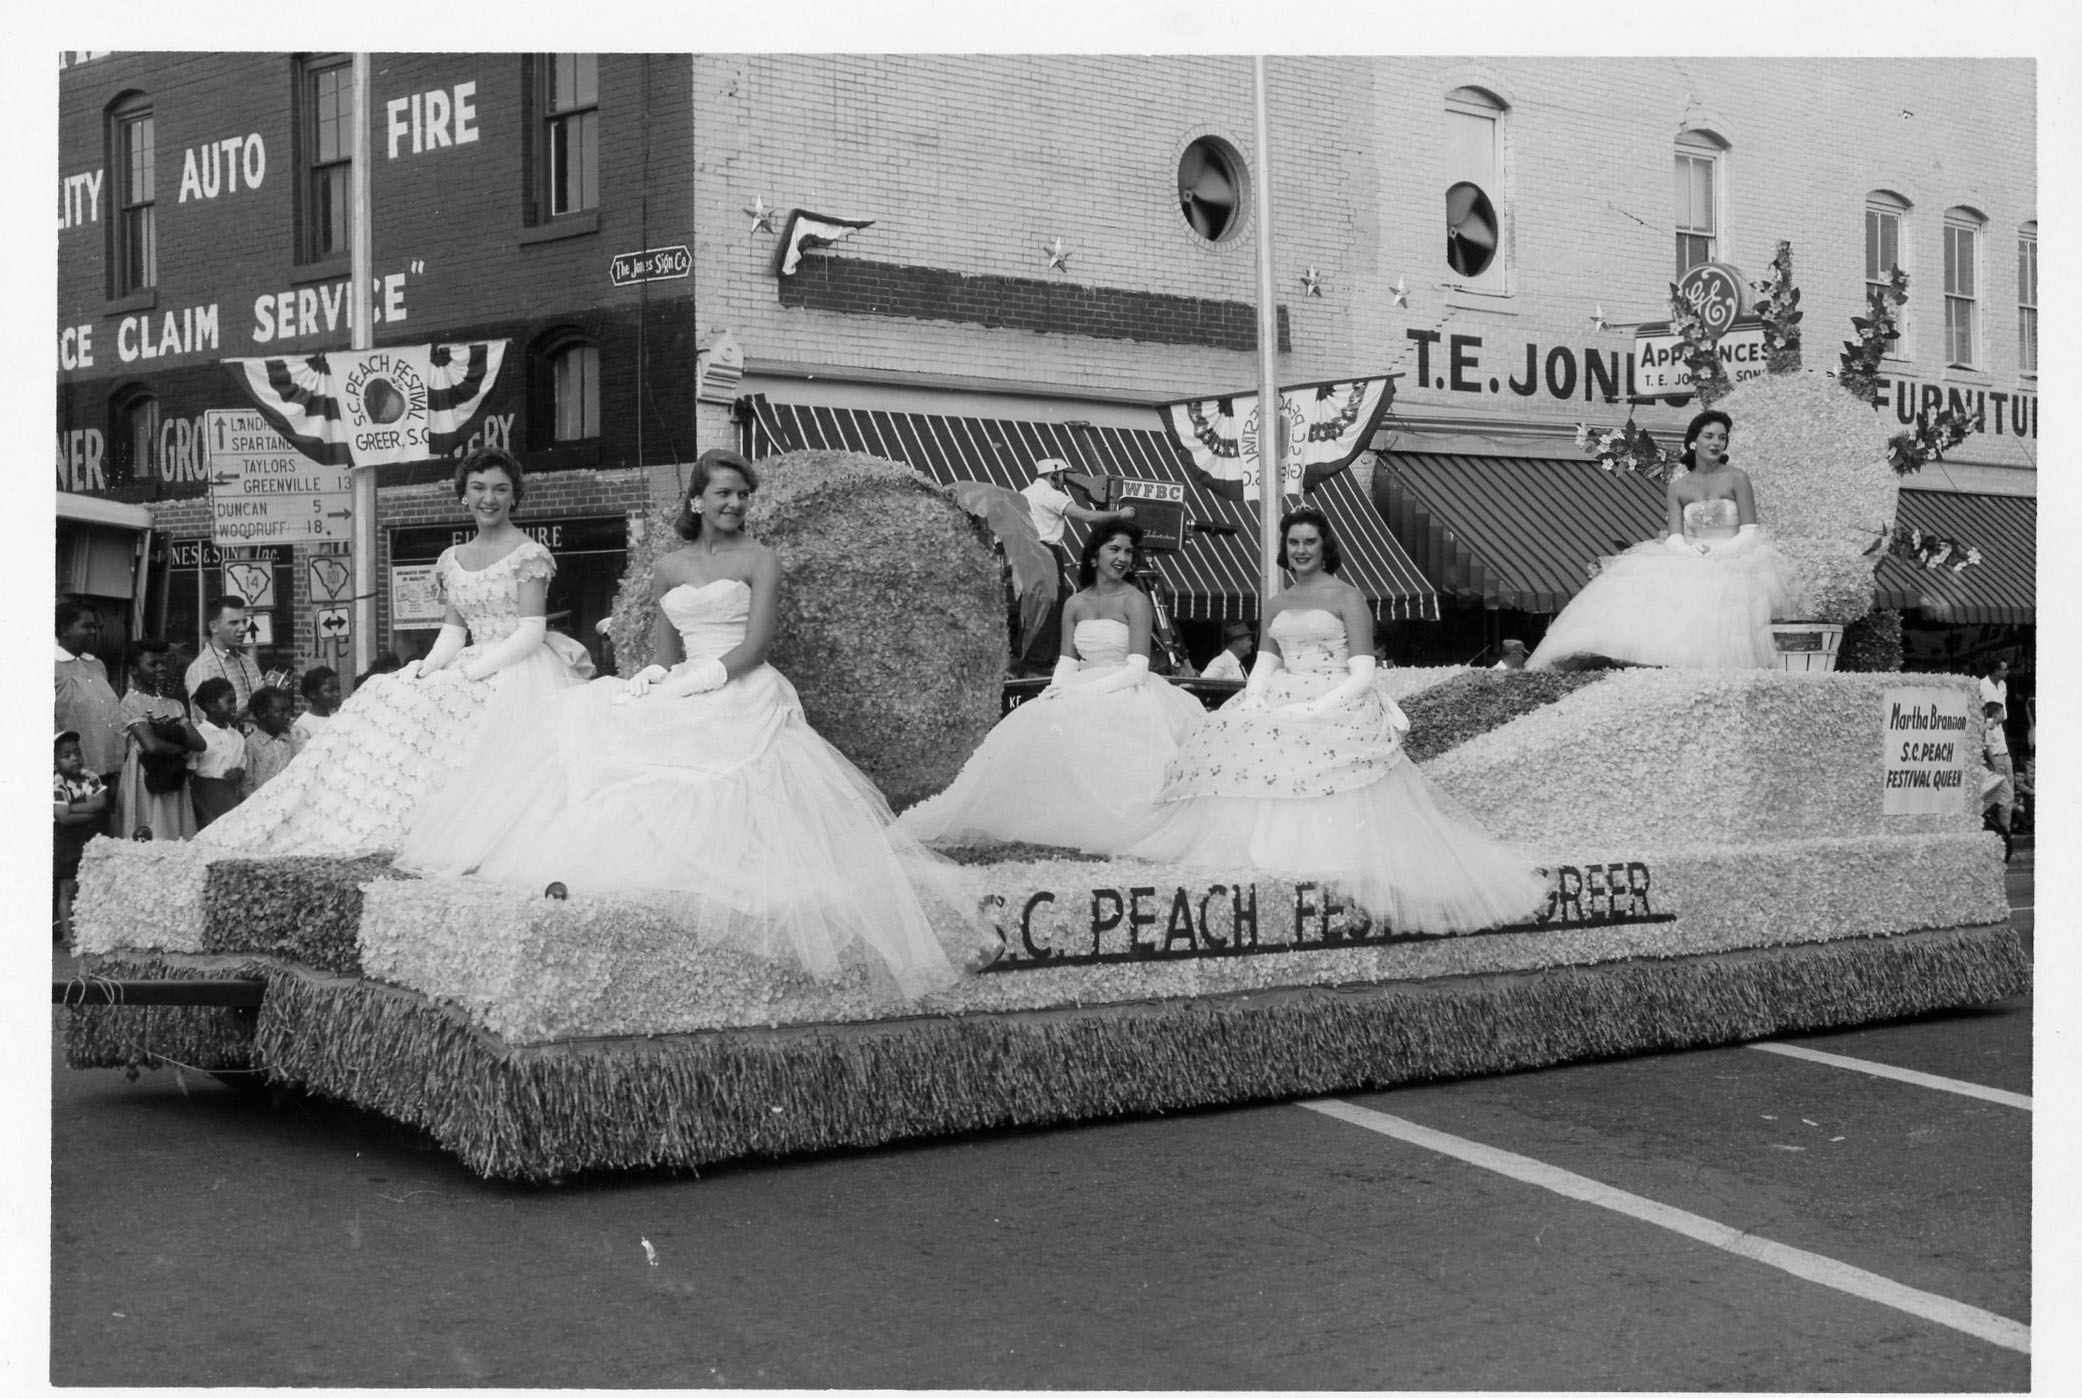 he 1958 Greer Peach Festival parade and float featuring the previous year’s Peach Queen Martha Brannon.